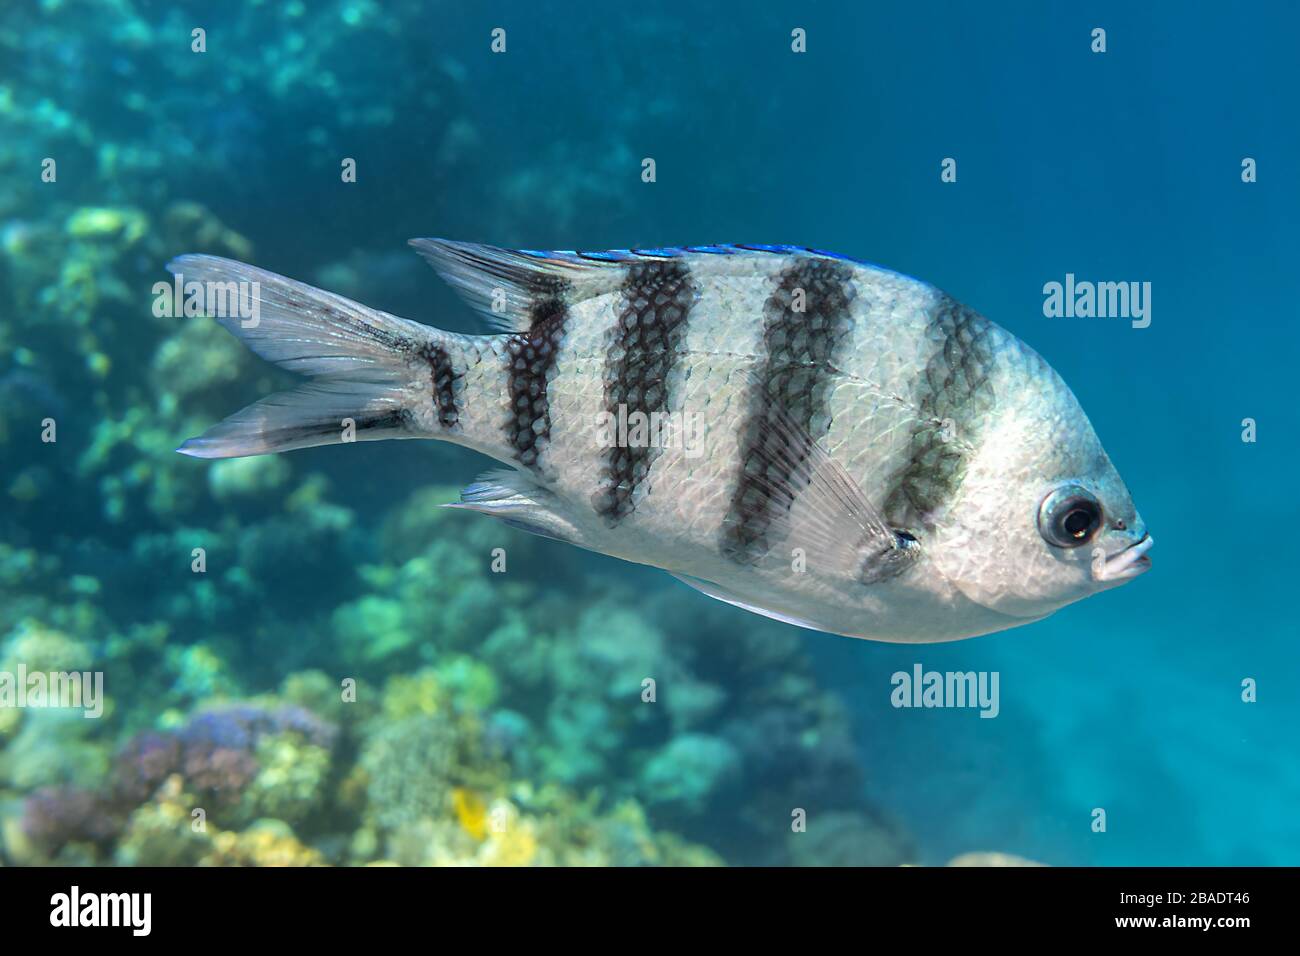 Scissortail Sergeant (Major, Pintano, Abudefduf) In Blue Turquoise Water. Striped Indo-Pacific Tropical Fish In The Ocean.  Colorful Beautiful Saltwat Stock Photo